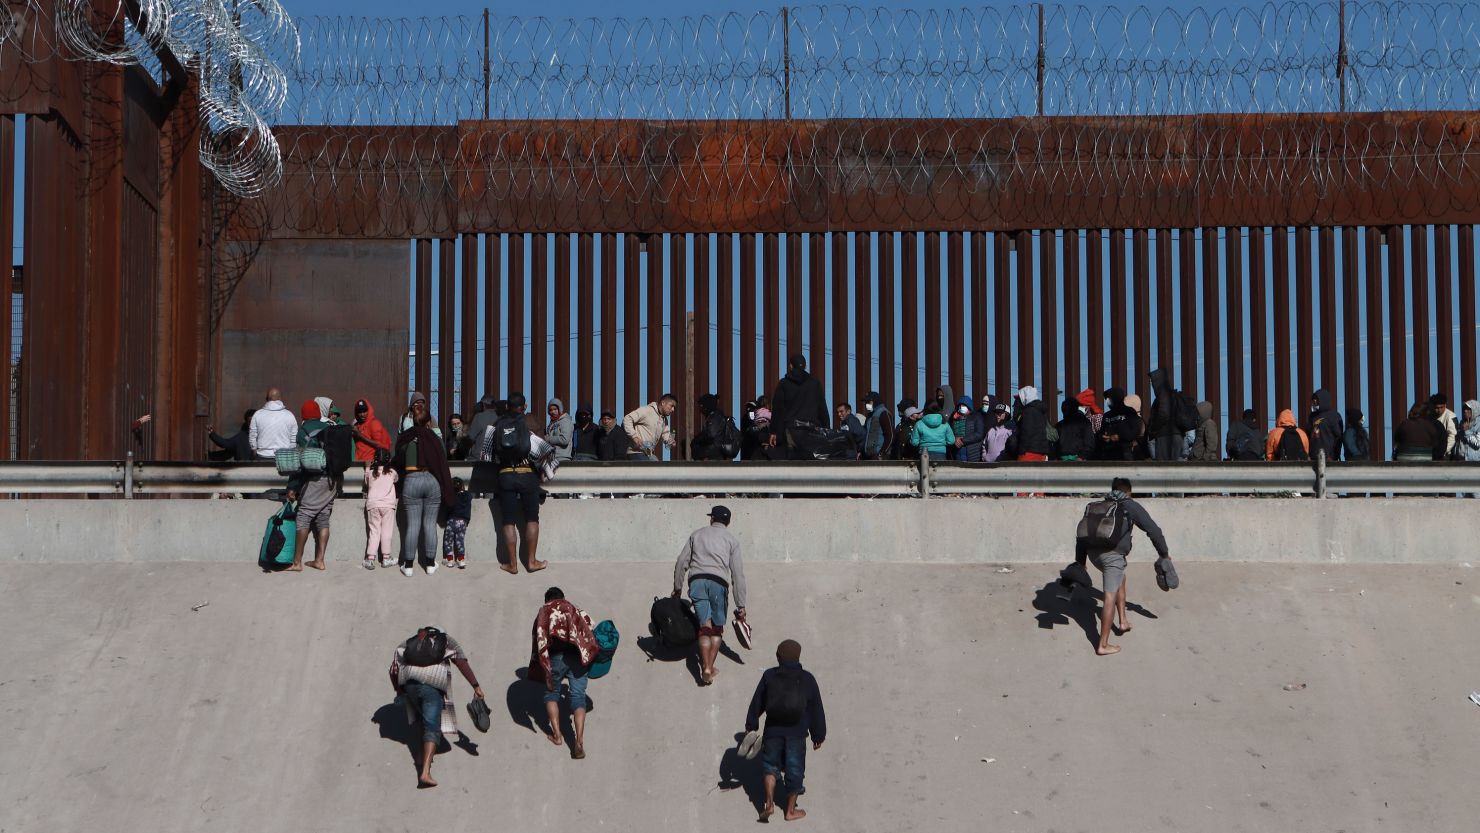 Migrants approach the border wall in Ciudad Juarez, Mexico, on Wednesday, December 21, 2022, on the other side of the border from El Paso, Texas.